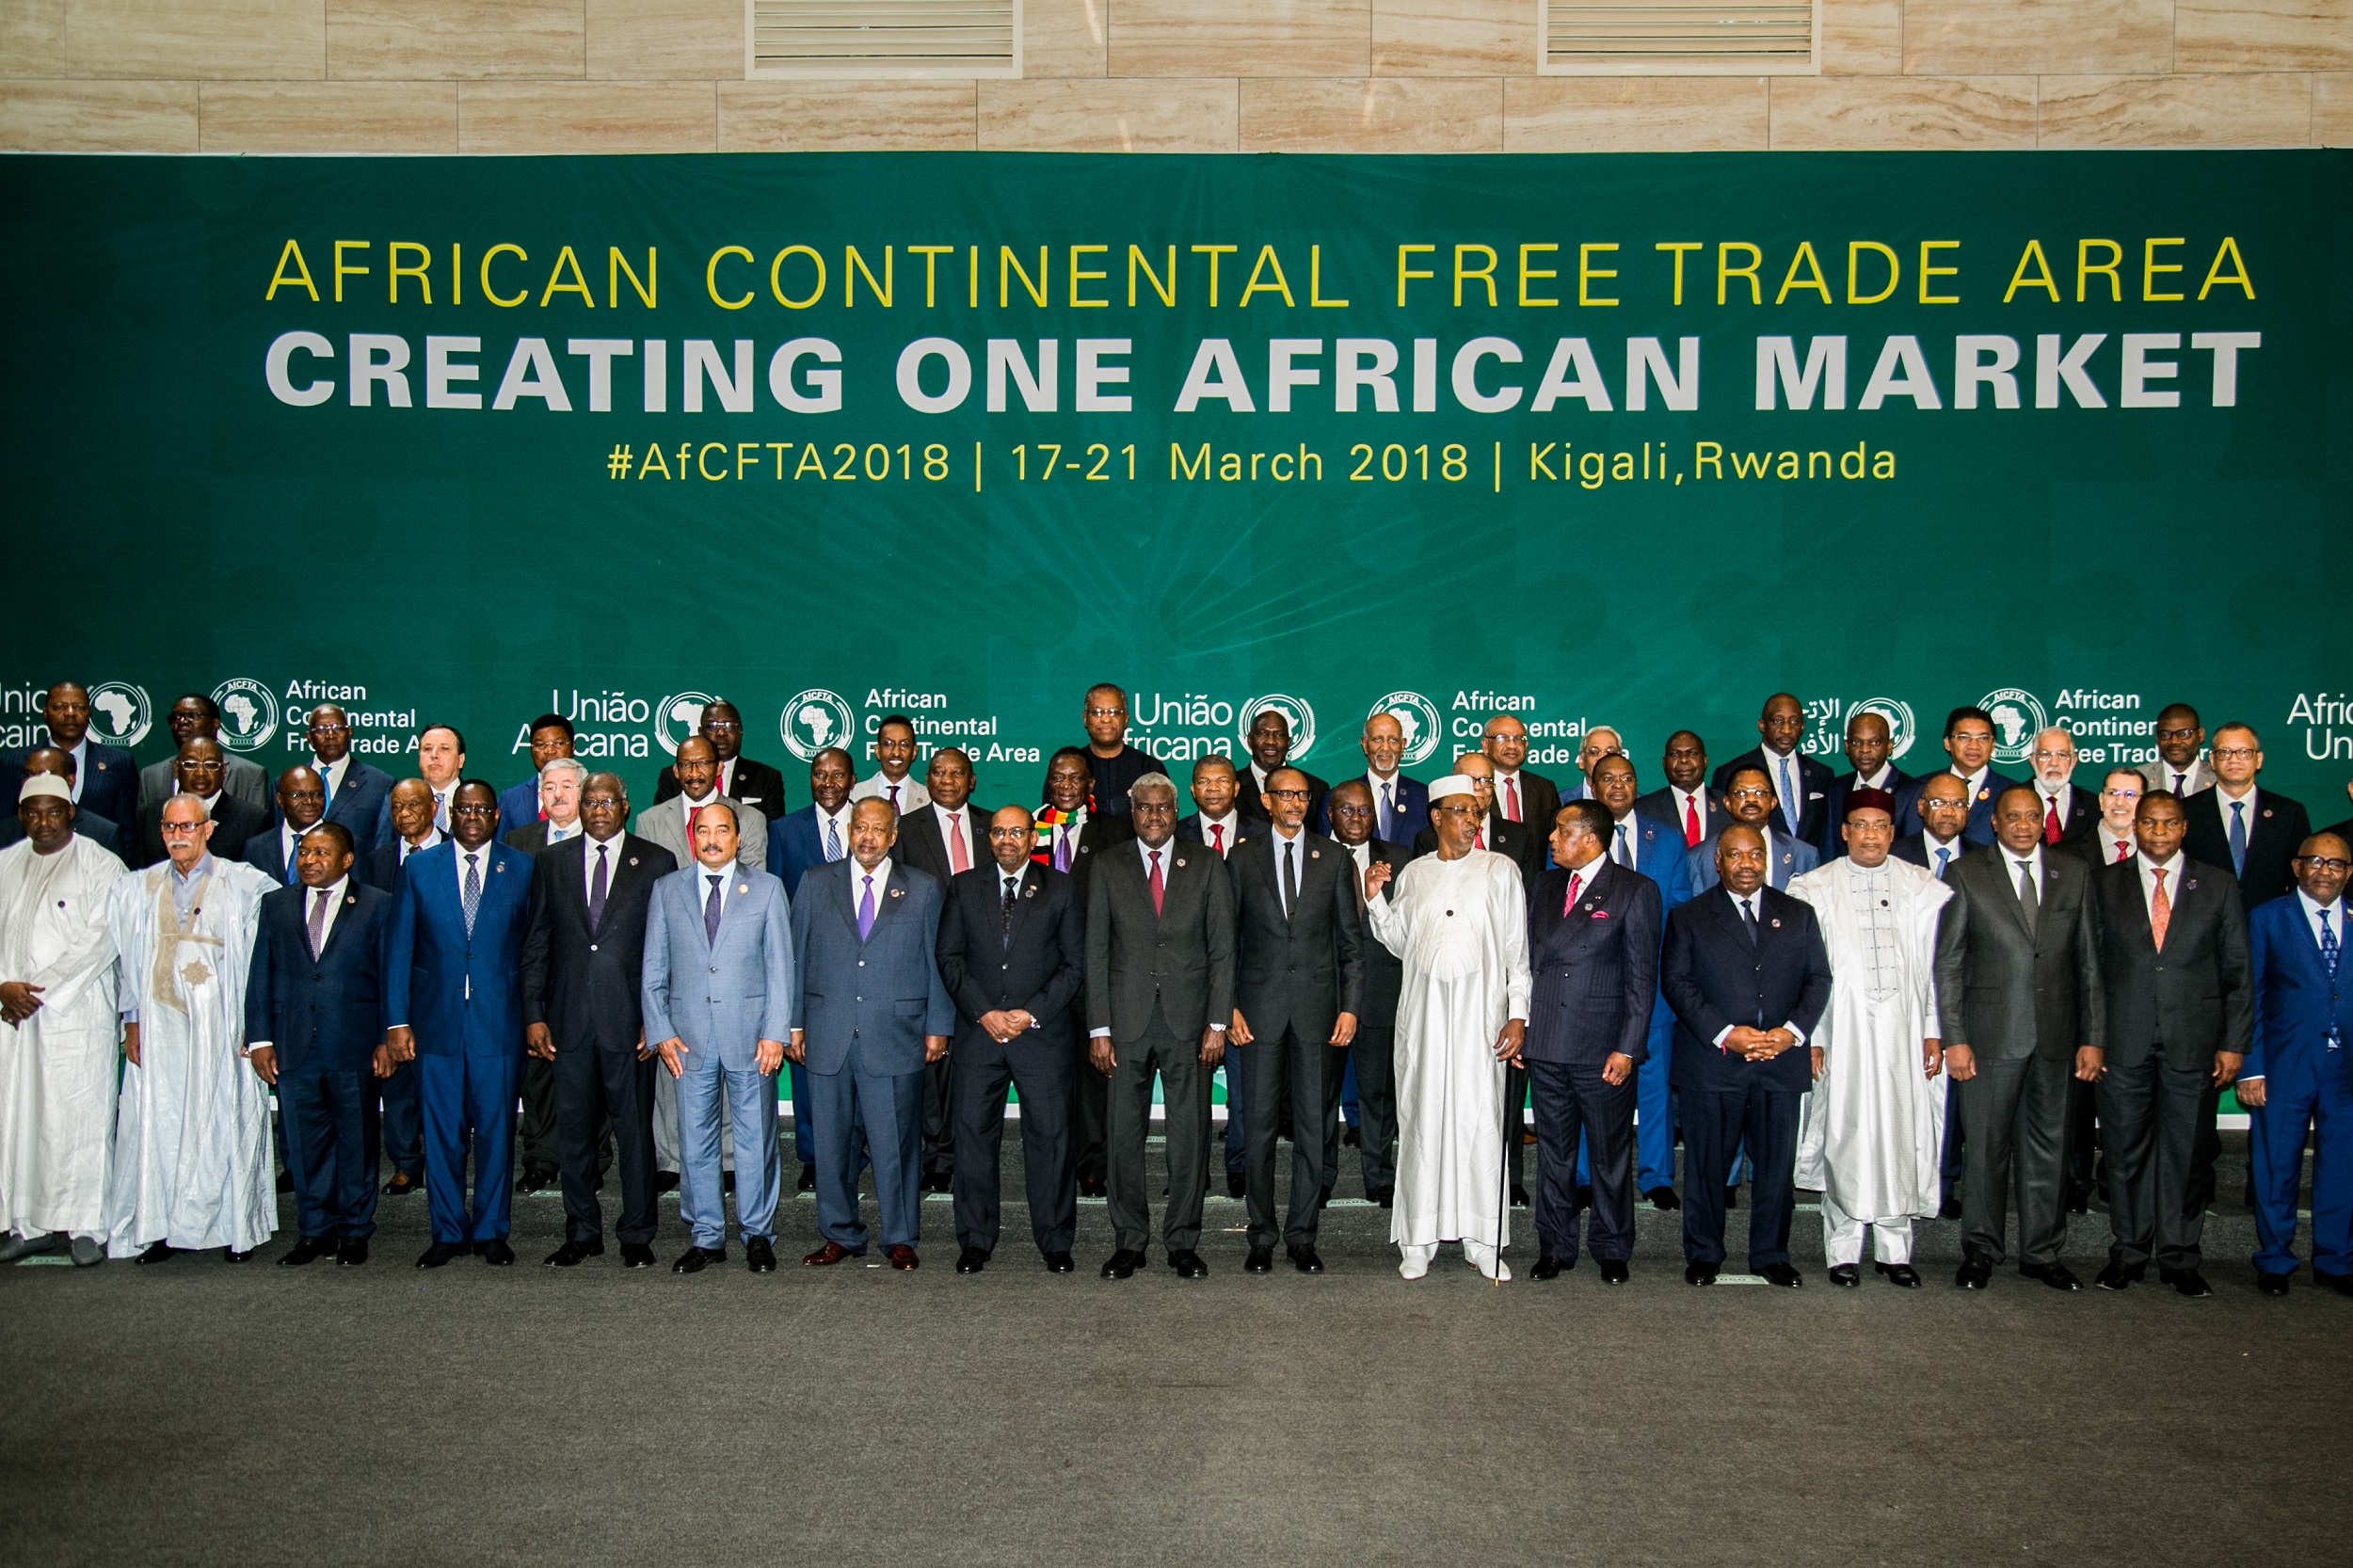 The African Heads of States and Governments pose during African Union (AU) Summit for the agreement to establish the African Continental Free Trade Area in Kigali, Rwanda, on March 21, 2018. / AFP PHOTO / STR